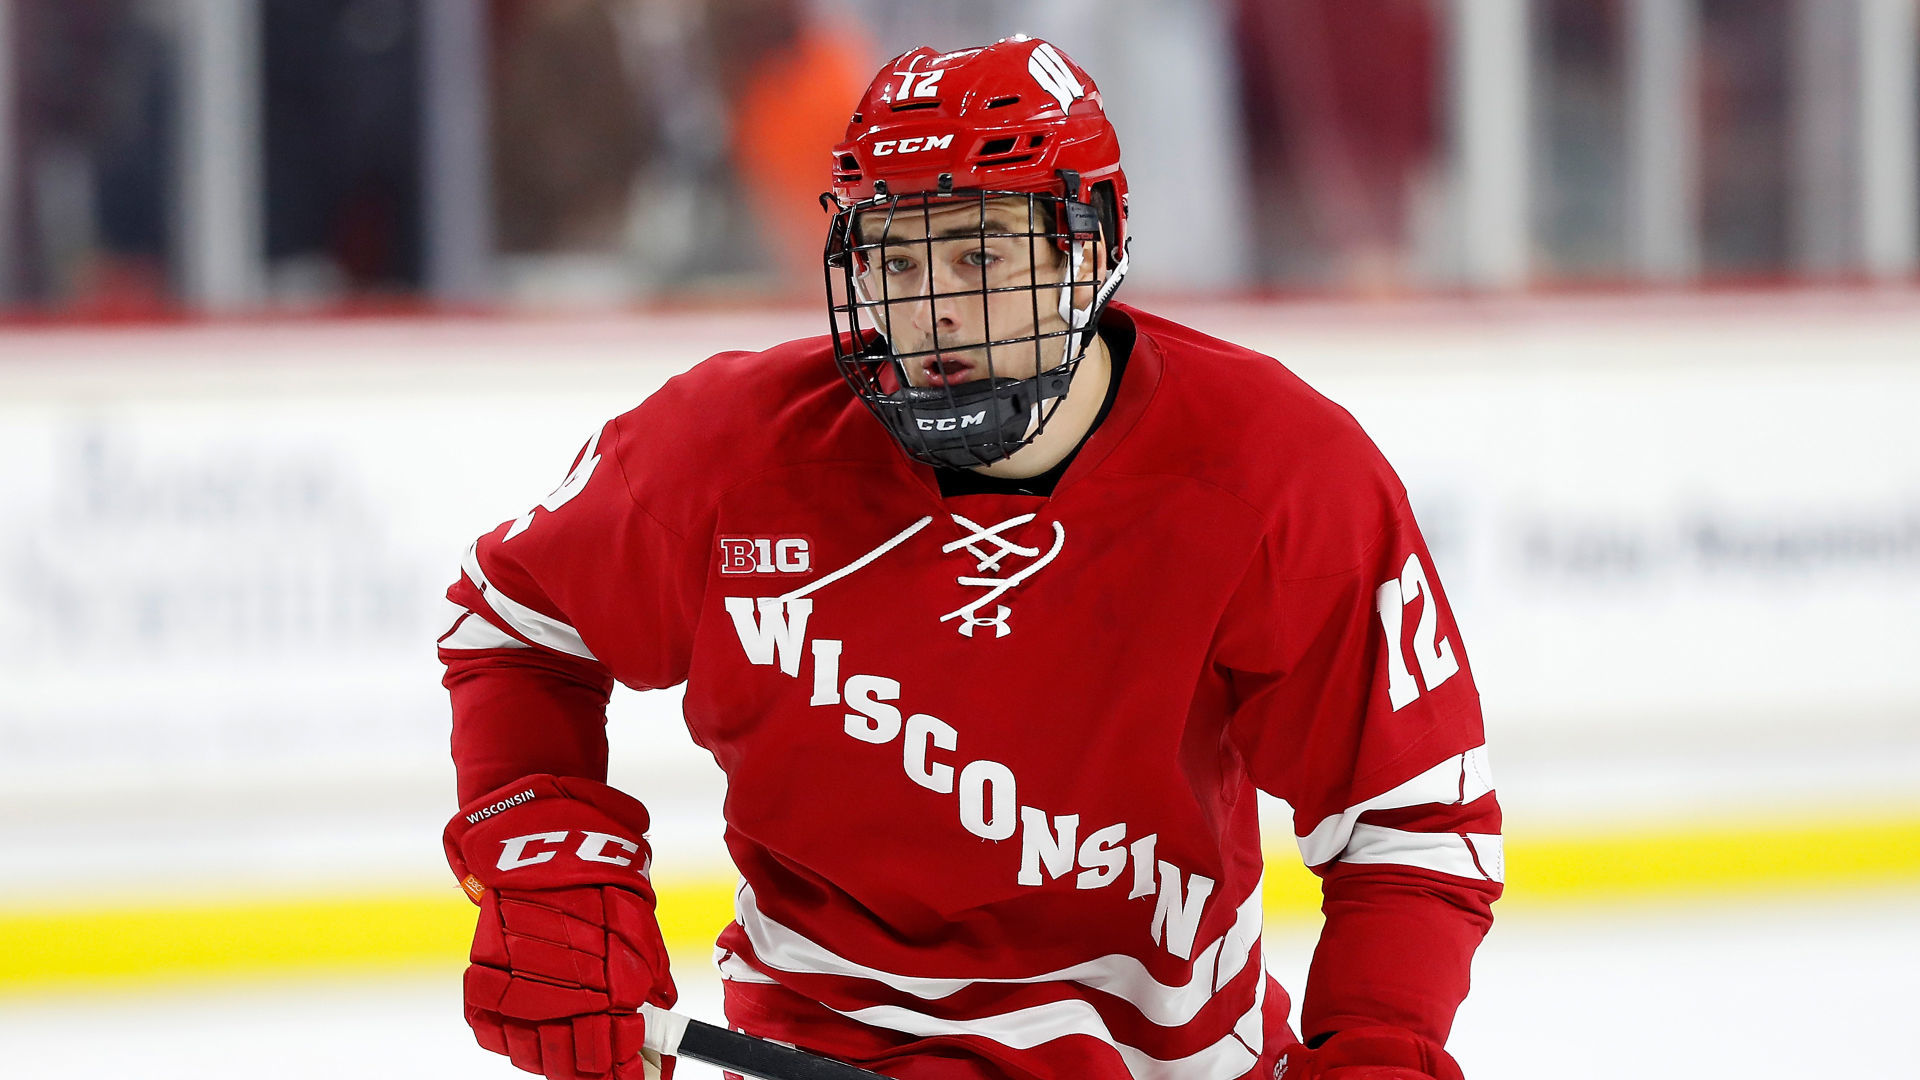 Madisons Mick Messner enters transfer portal after 2 seasons with Badgers mens hockey team